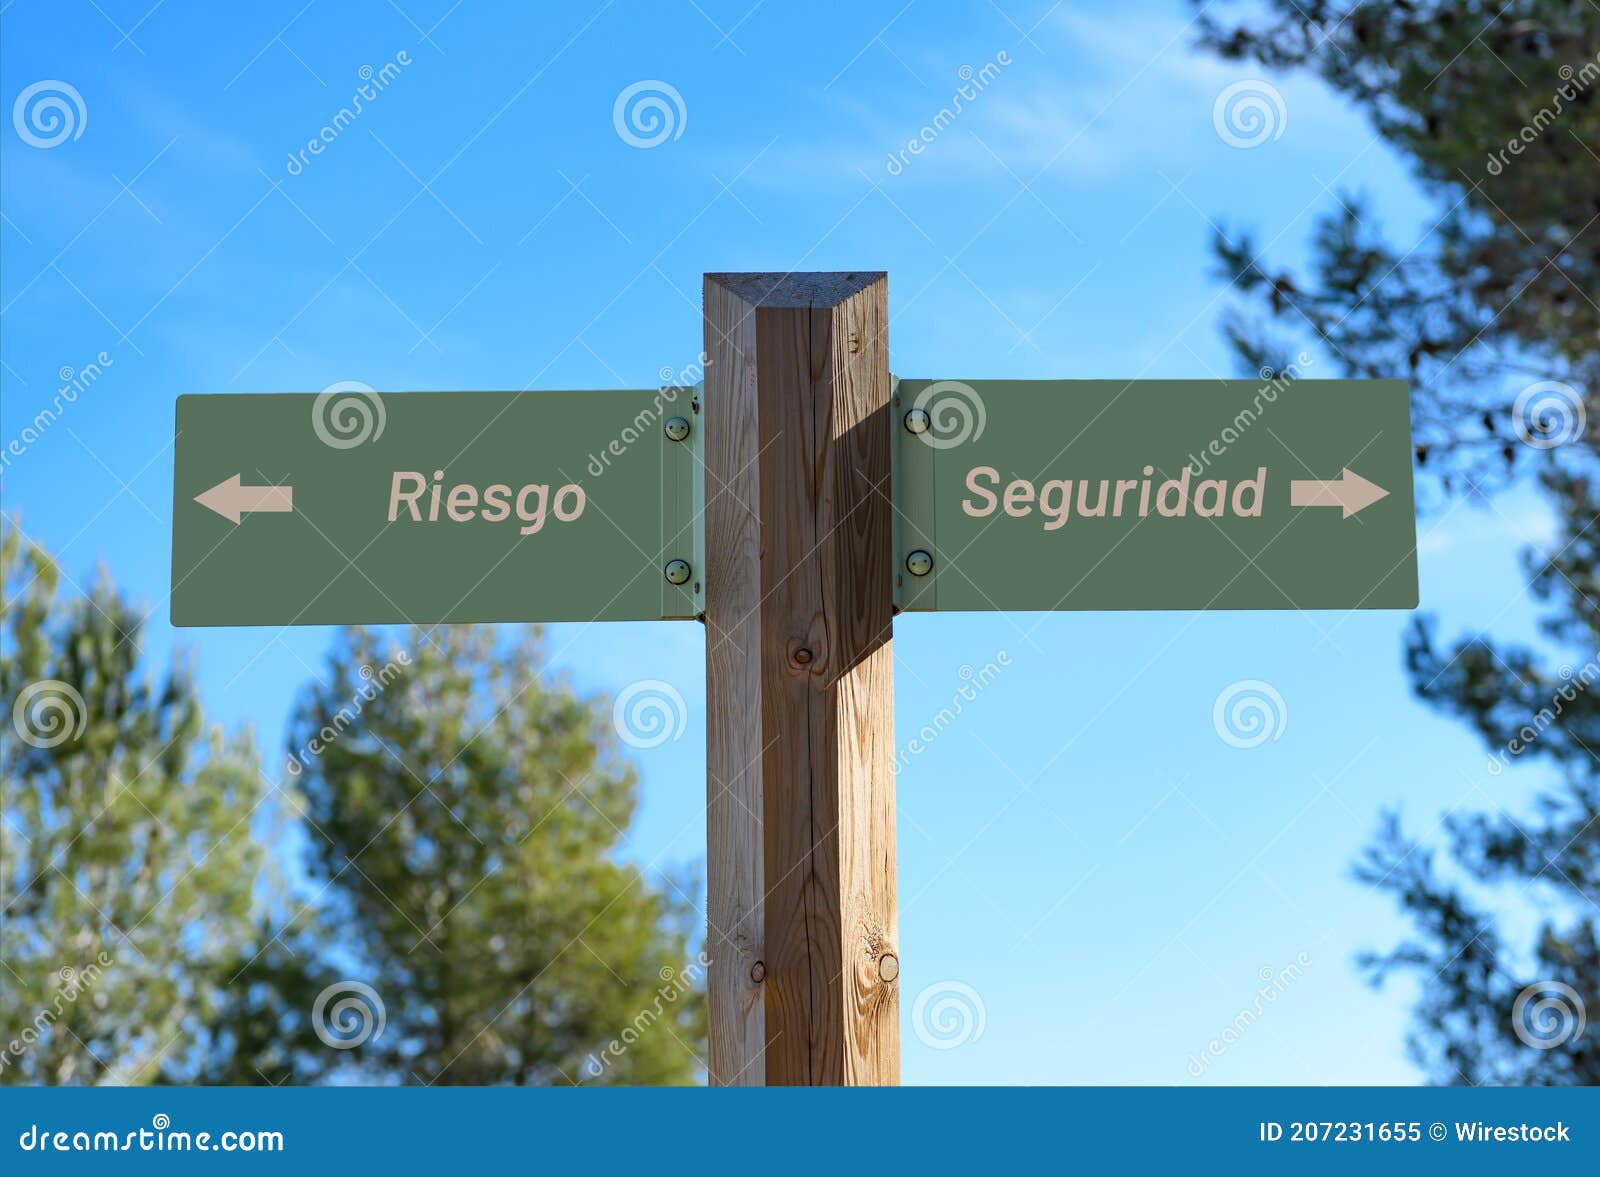 selective focus shot of a way signpost with risk and security writings in spanish